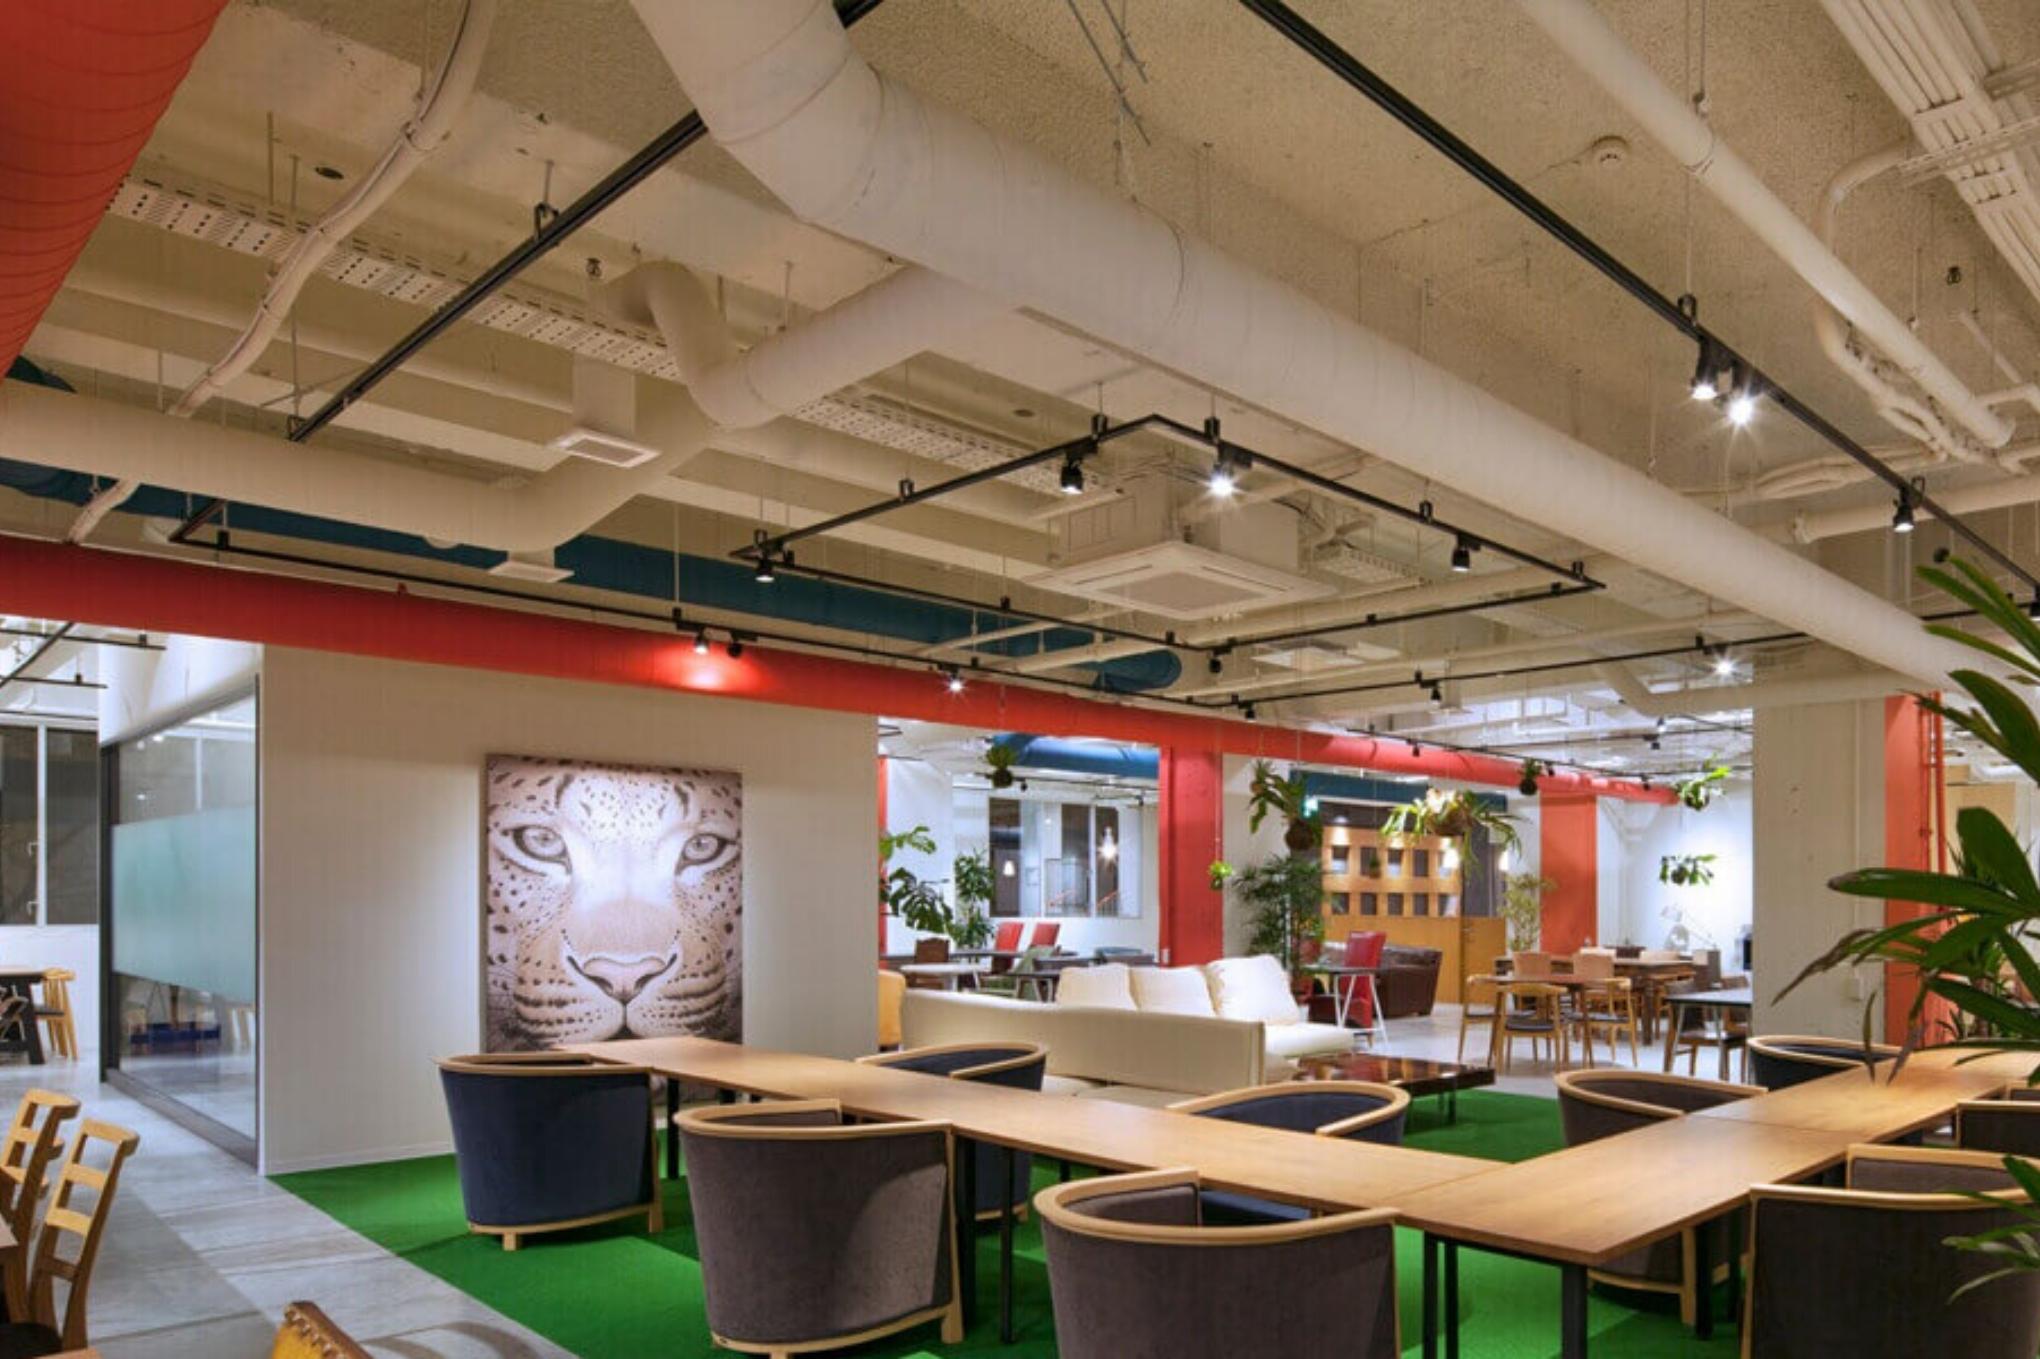 To show the Hakata co-working space branch in other location of The Company